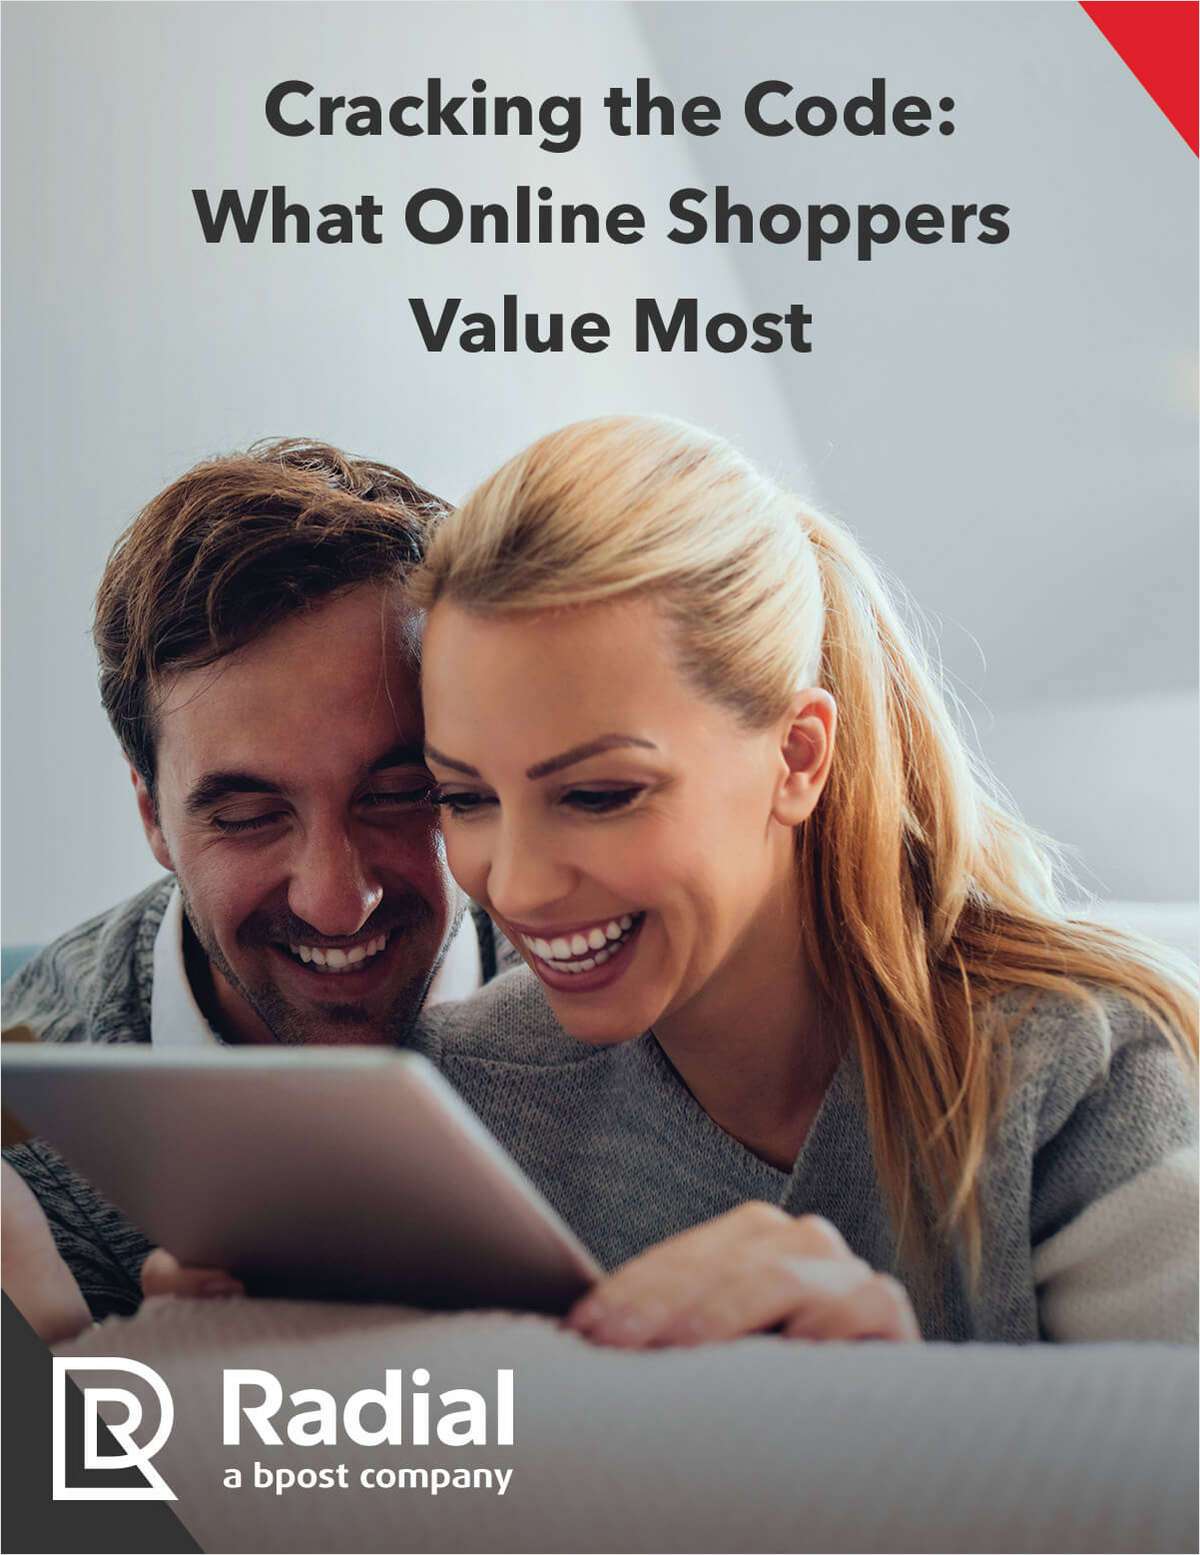 What Online Shoppers Value Most